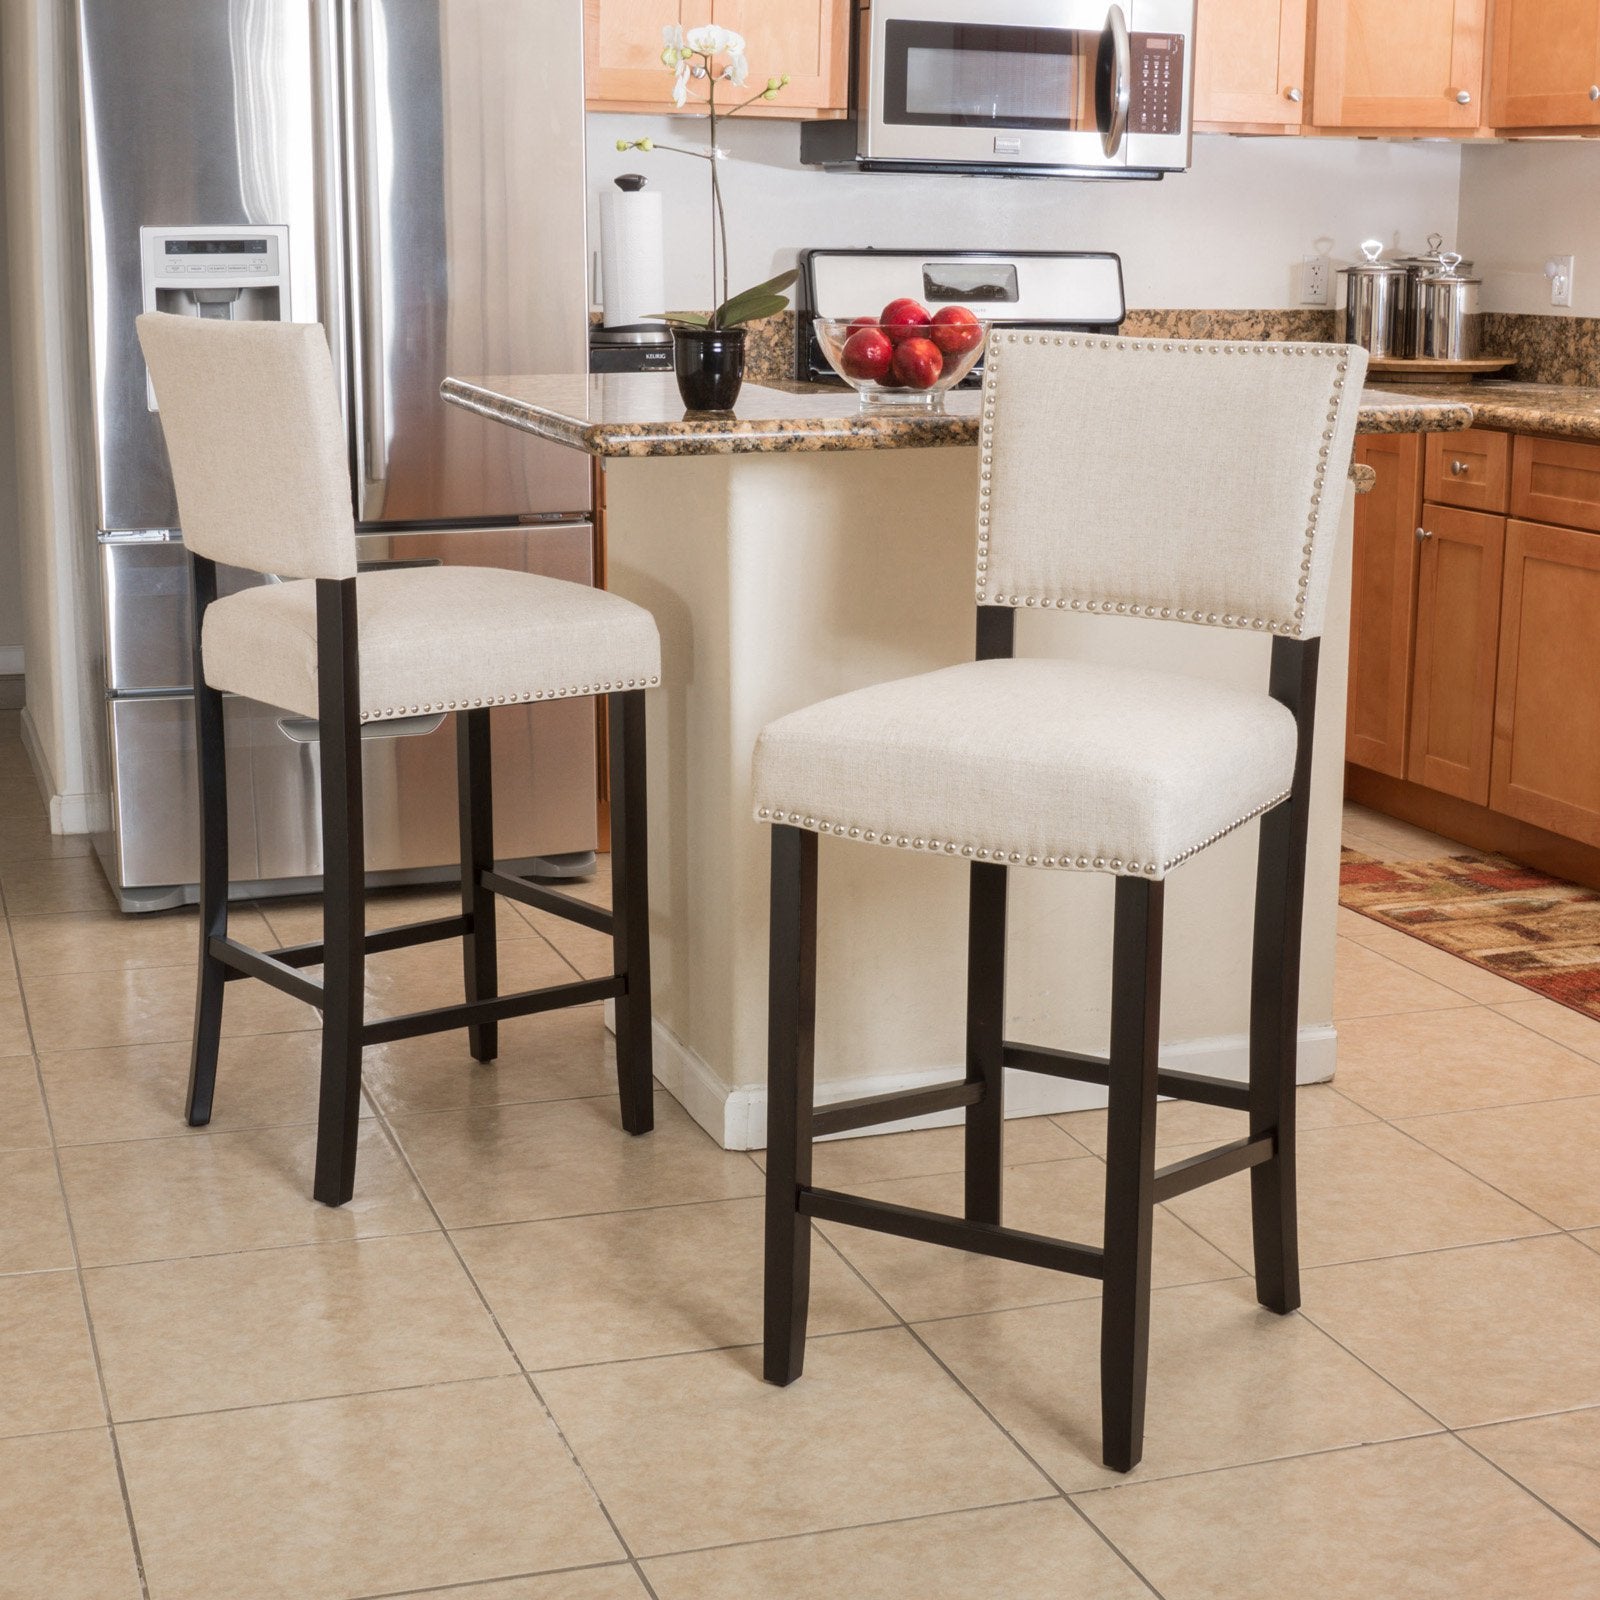 Cleveland 30.5 in. Bar Height Stool with Cushion - Set of 2 7085